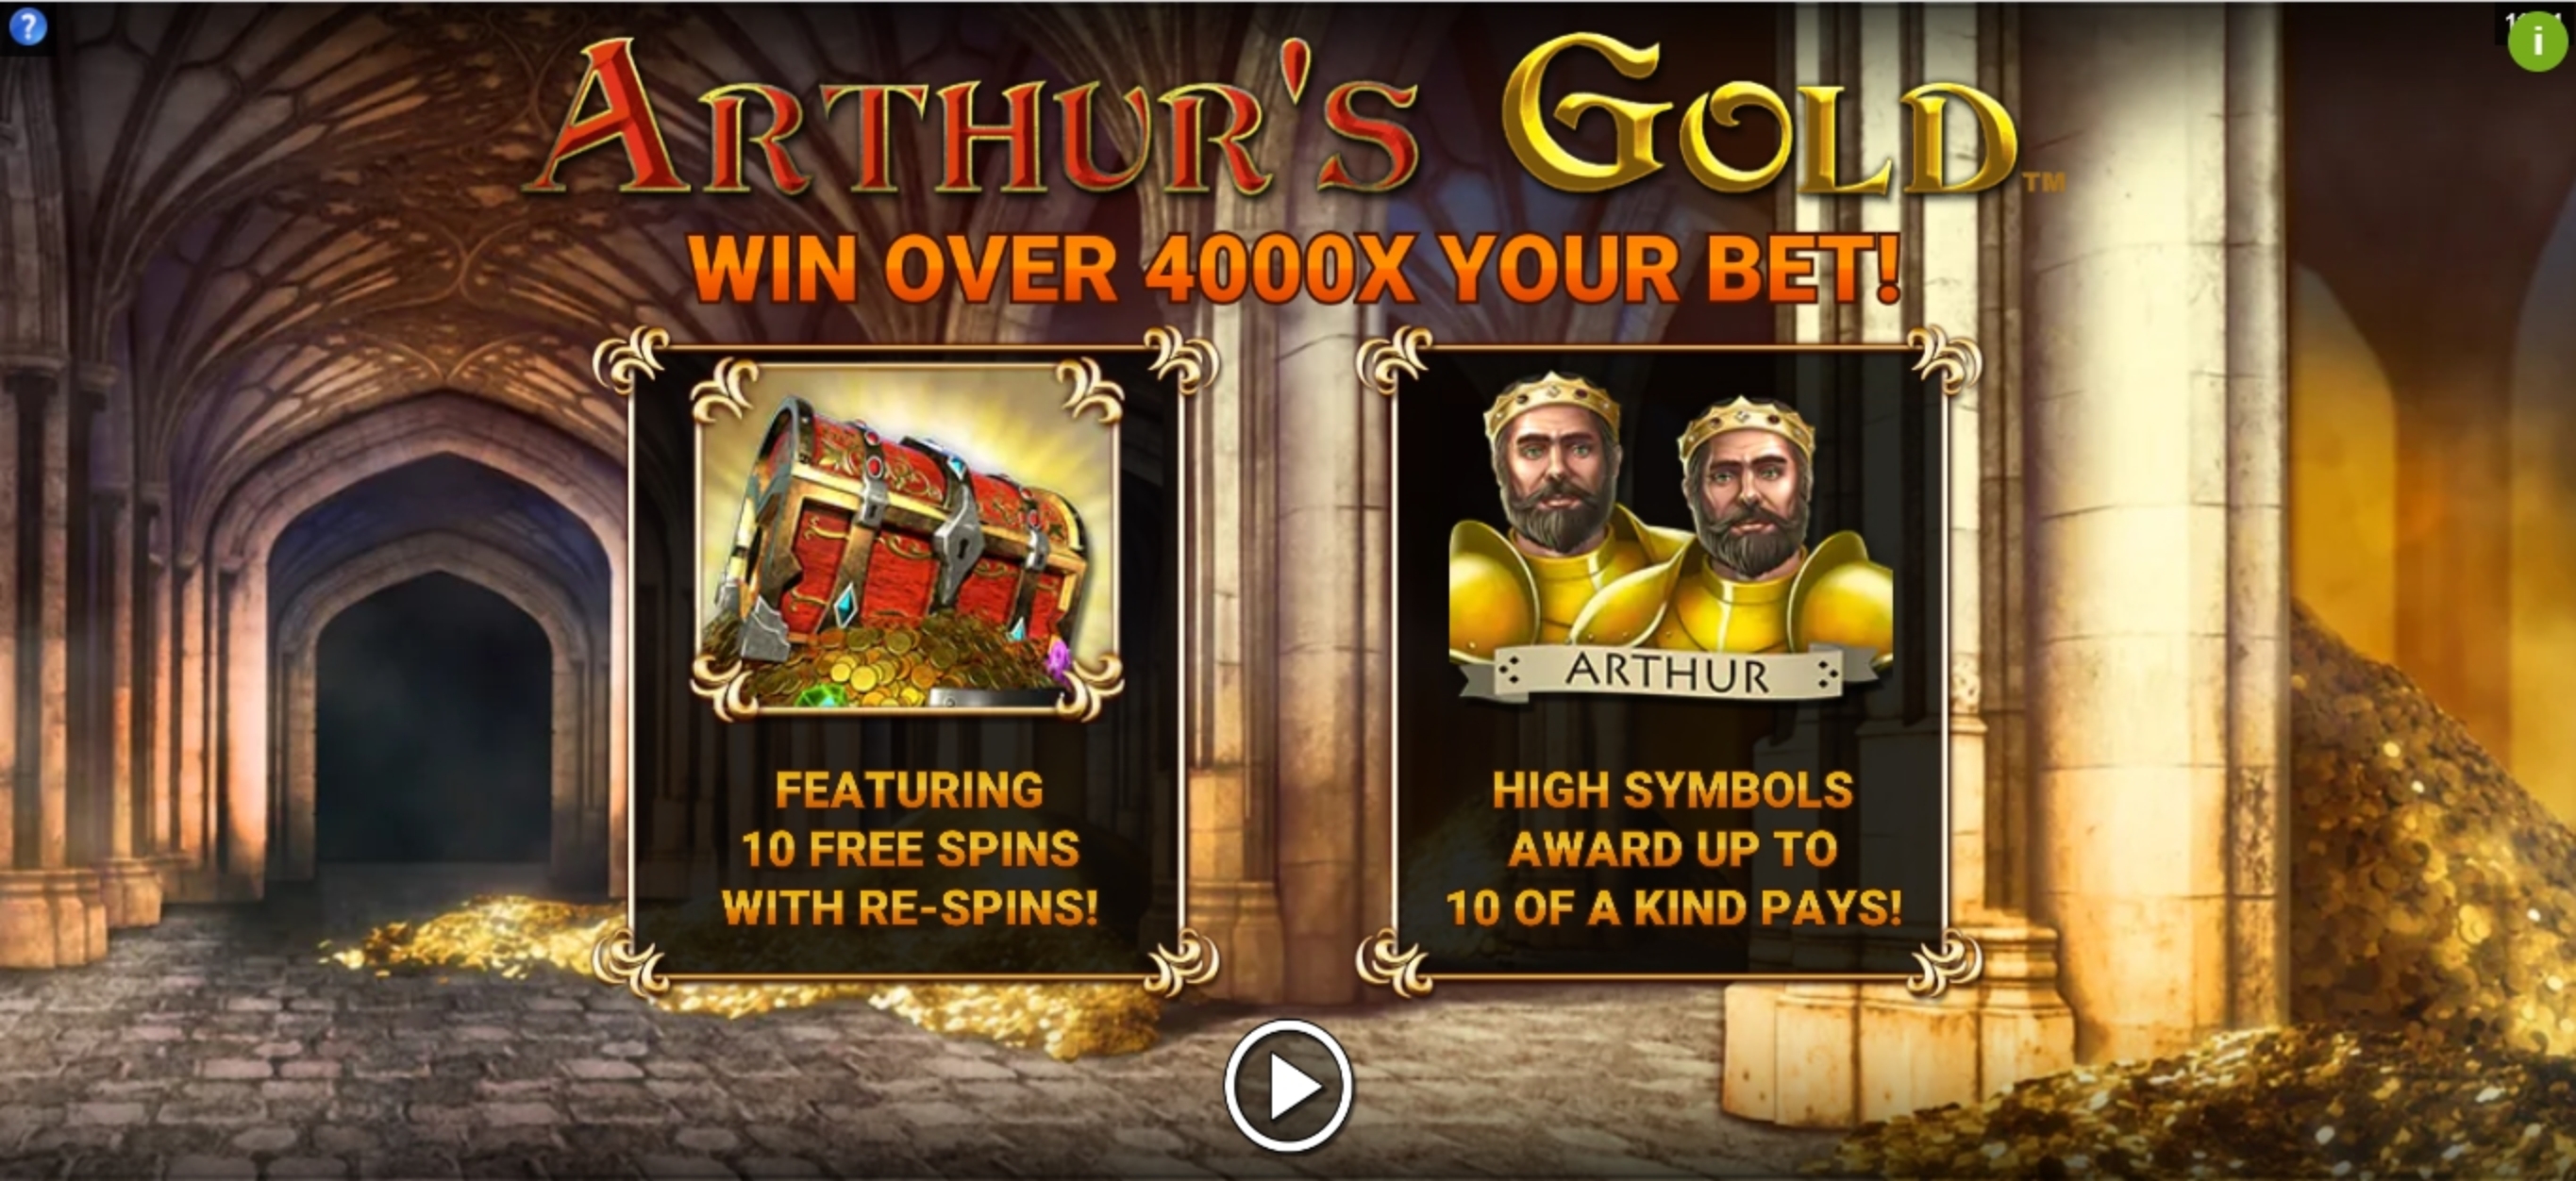 Play Arthurs Gold Free Casino Slot Game by Gold Coin Studios